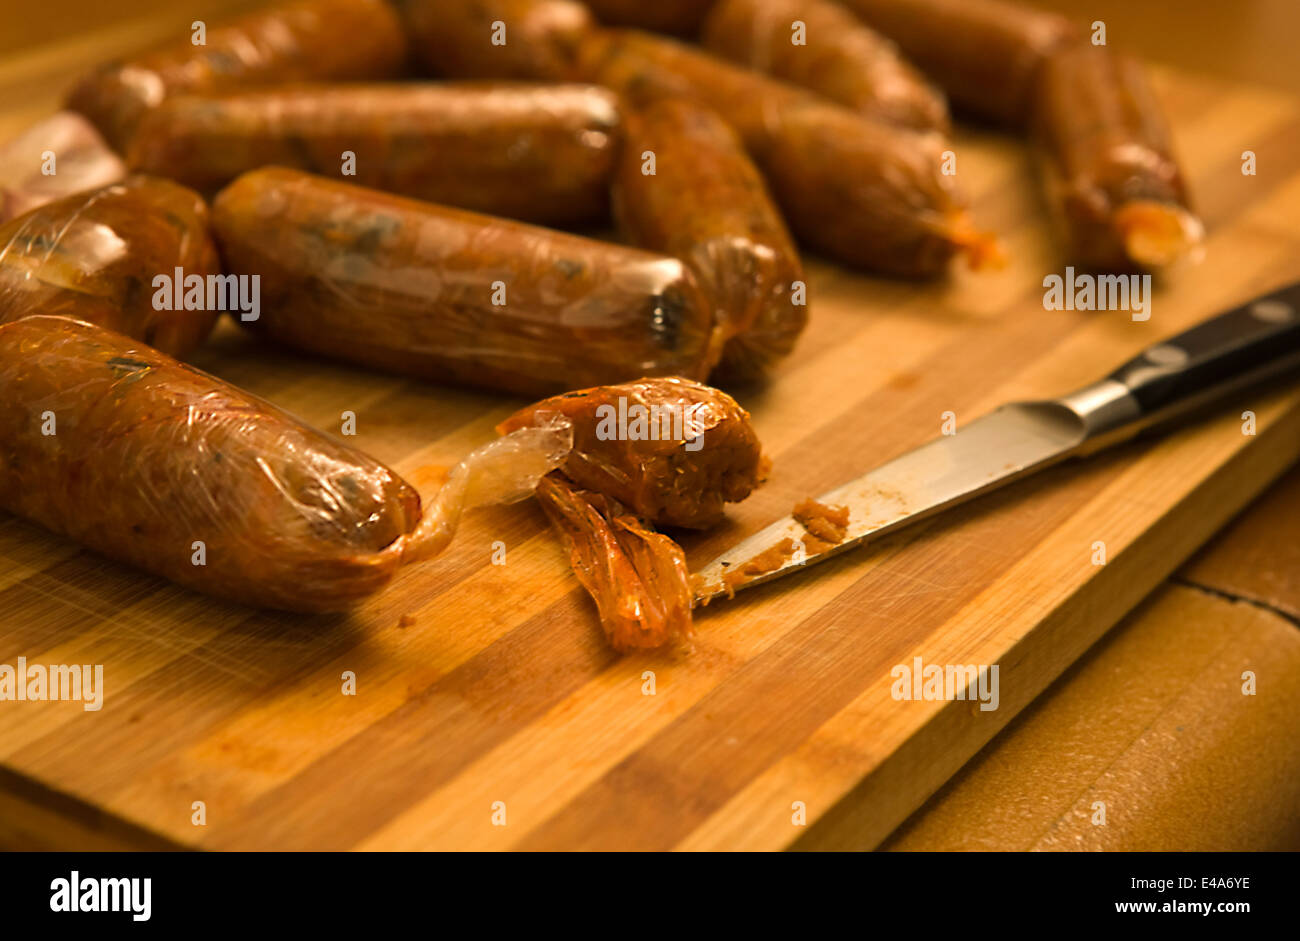 Chorizo or spicy sausage made of boiled vegetables such as marrow, potatoes, onions, pumpkin, et. displayed over a cutting board Stock Photo